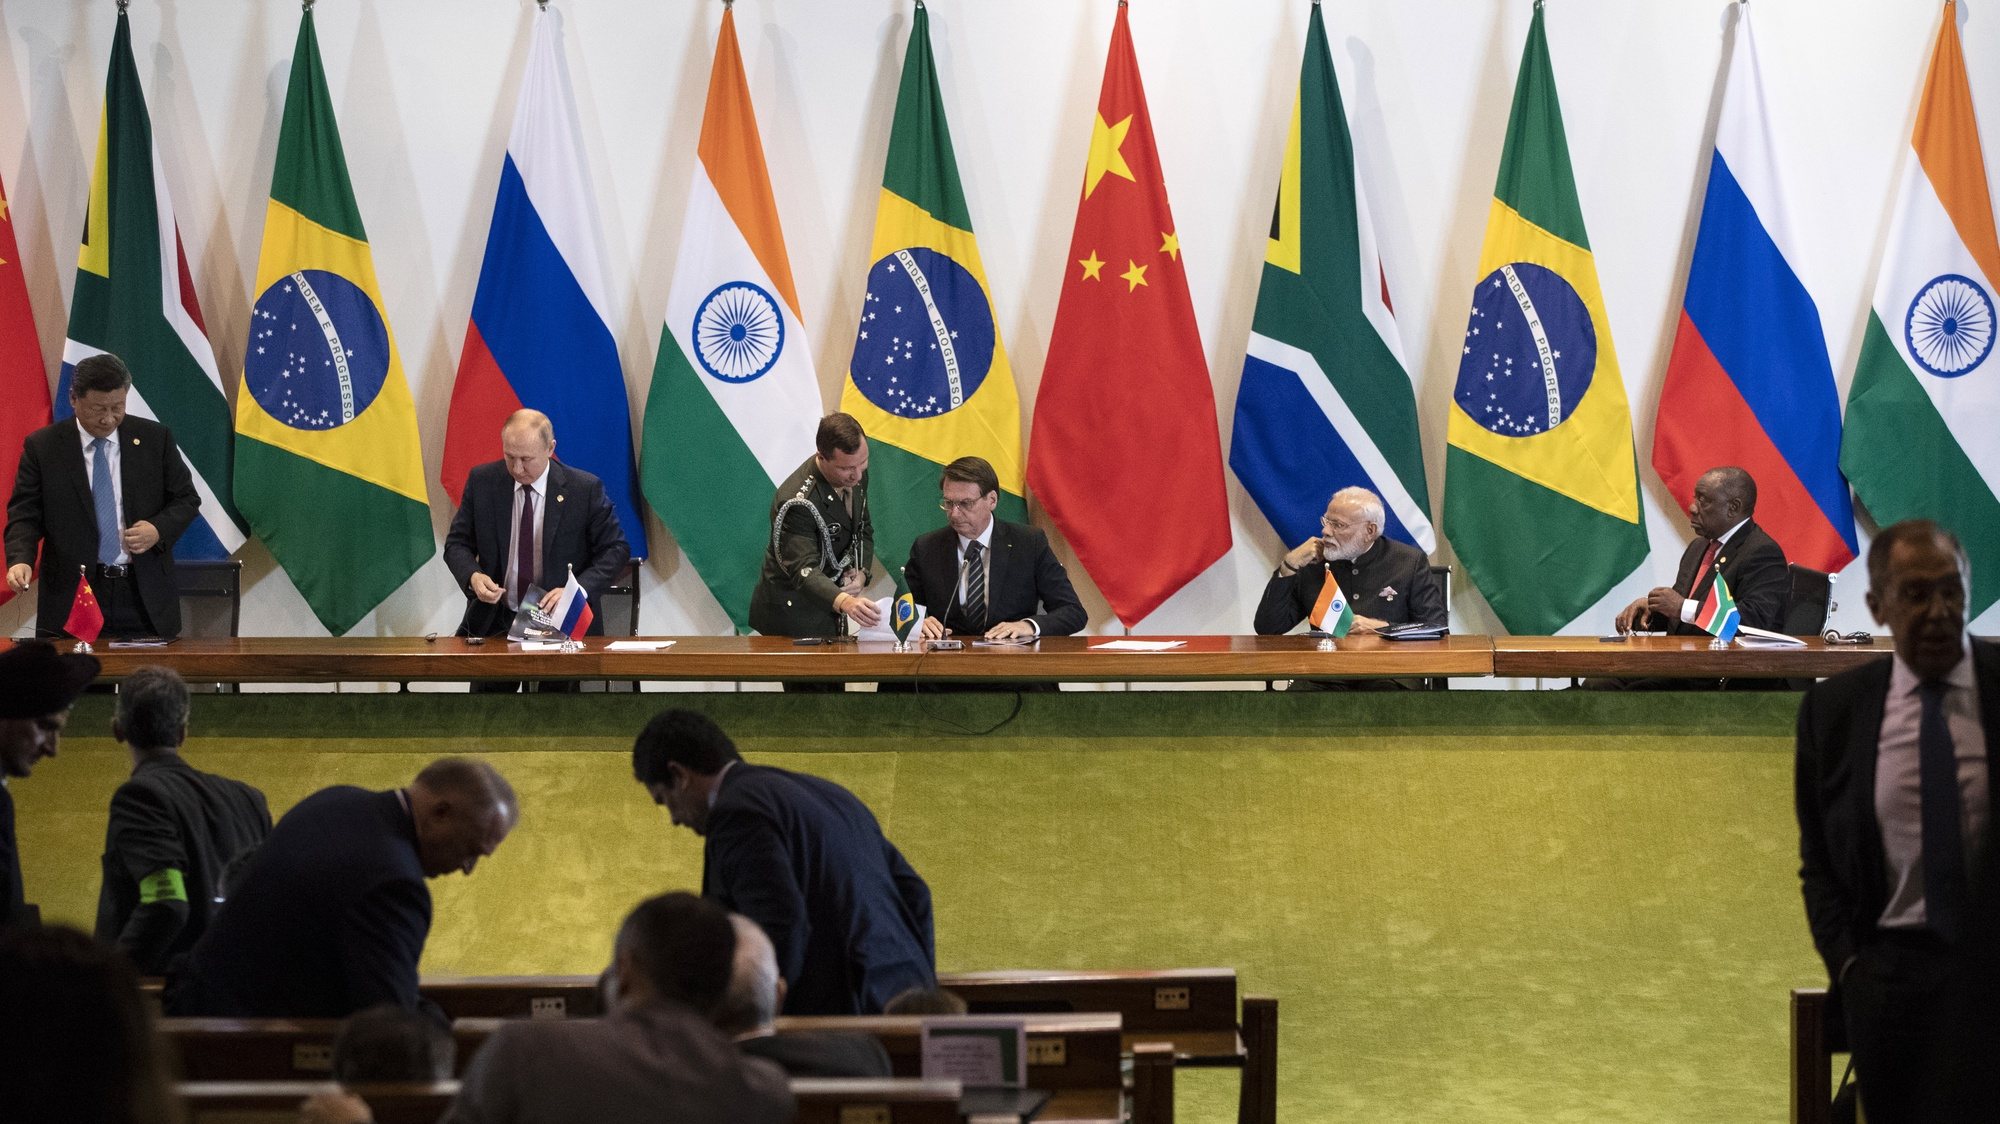 epa07996241 Chinese President Xi Jinping (back  L), Russian President Vladimir Putin (back  2-L), Brazilian President Jair Bolsonaro (back  3-R), Indian Prime Minister Narendra Modi (back 2-R), and South African President Cyril Ramaphosa (back R) at the end of a meeting with members of the Business Council and management of the New Development Bank during  during the 11th BRICS leaders summit at the Itamaraty Palace in Brasilia, Brazil, 14  November 2019.  The BRICS (Brazil, Russia, India, China and South Africa)  leaders summit takes place on 13 -14 November in Brazil.  EPA/PAVEL GOLOVKIN / POOL